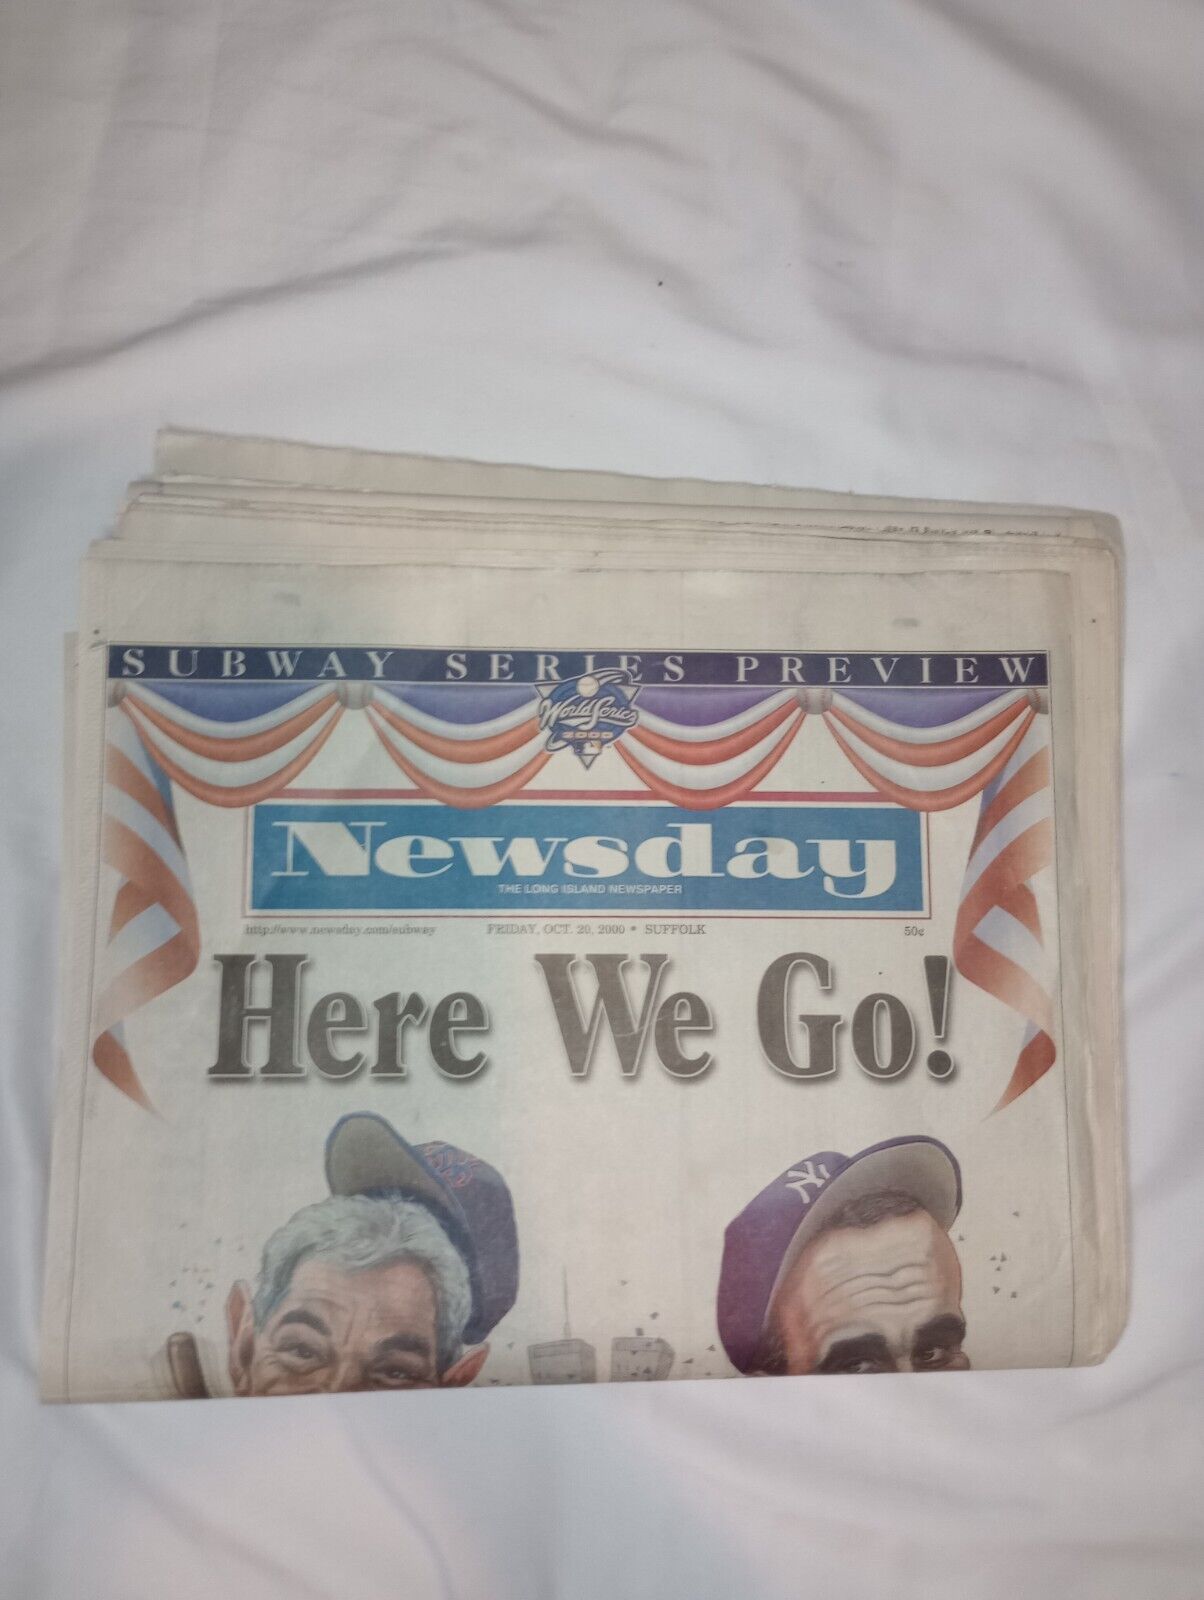 Newsday Oct 20 2000 - Here We Go Subway Series Preview